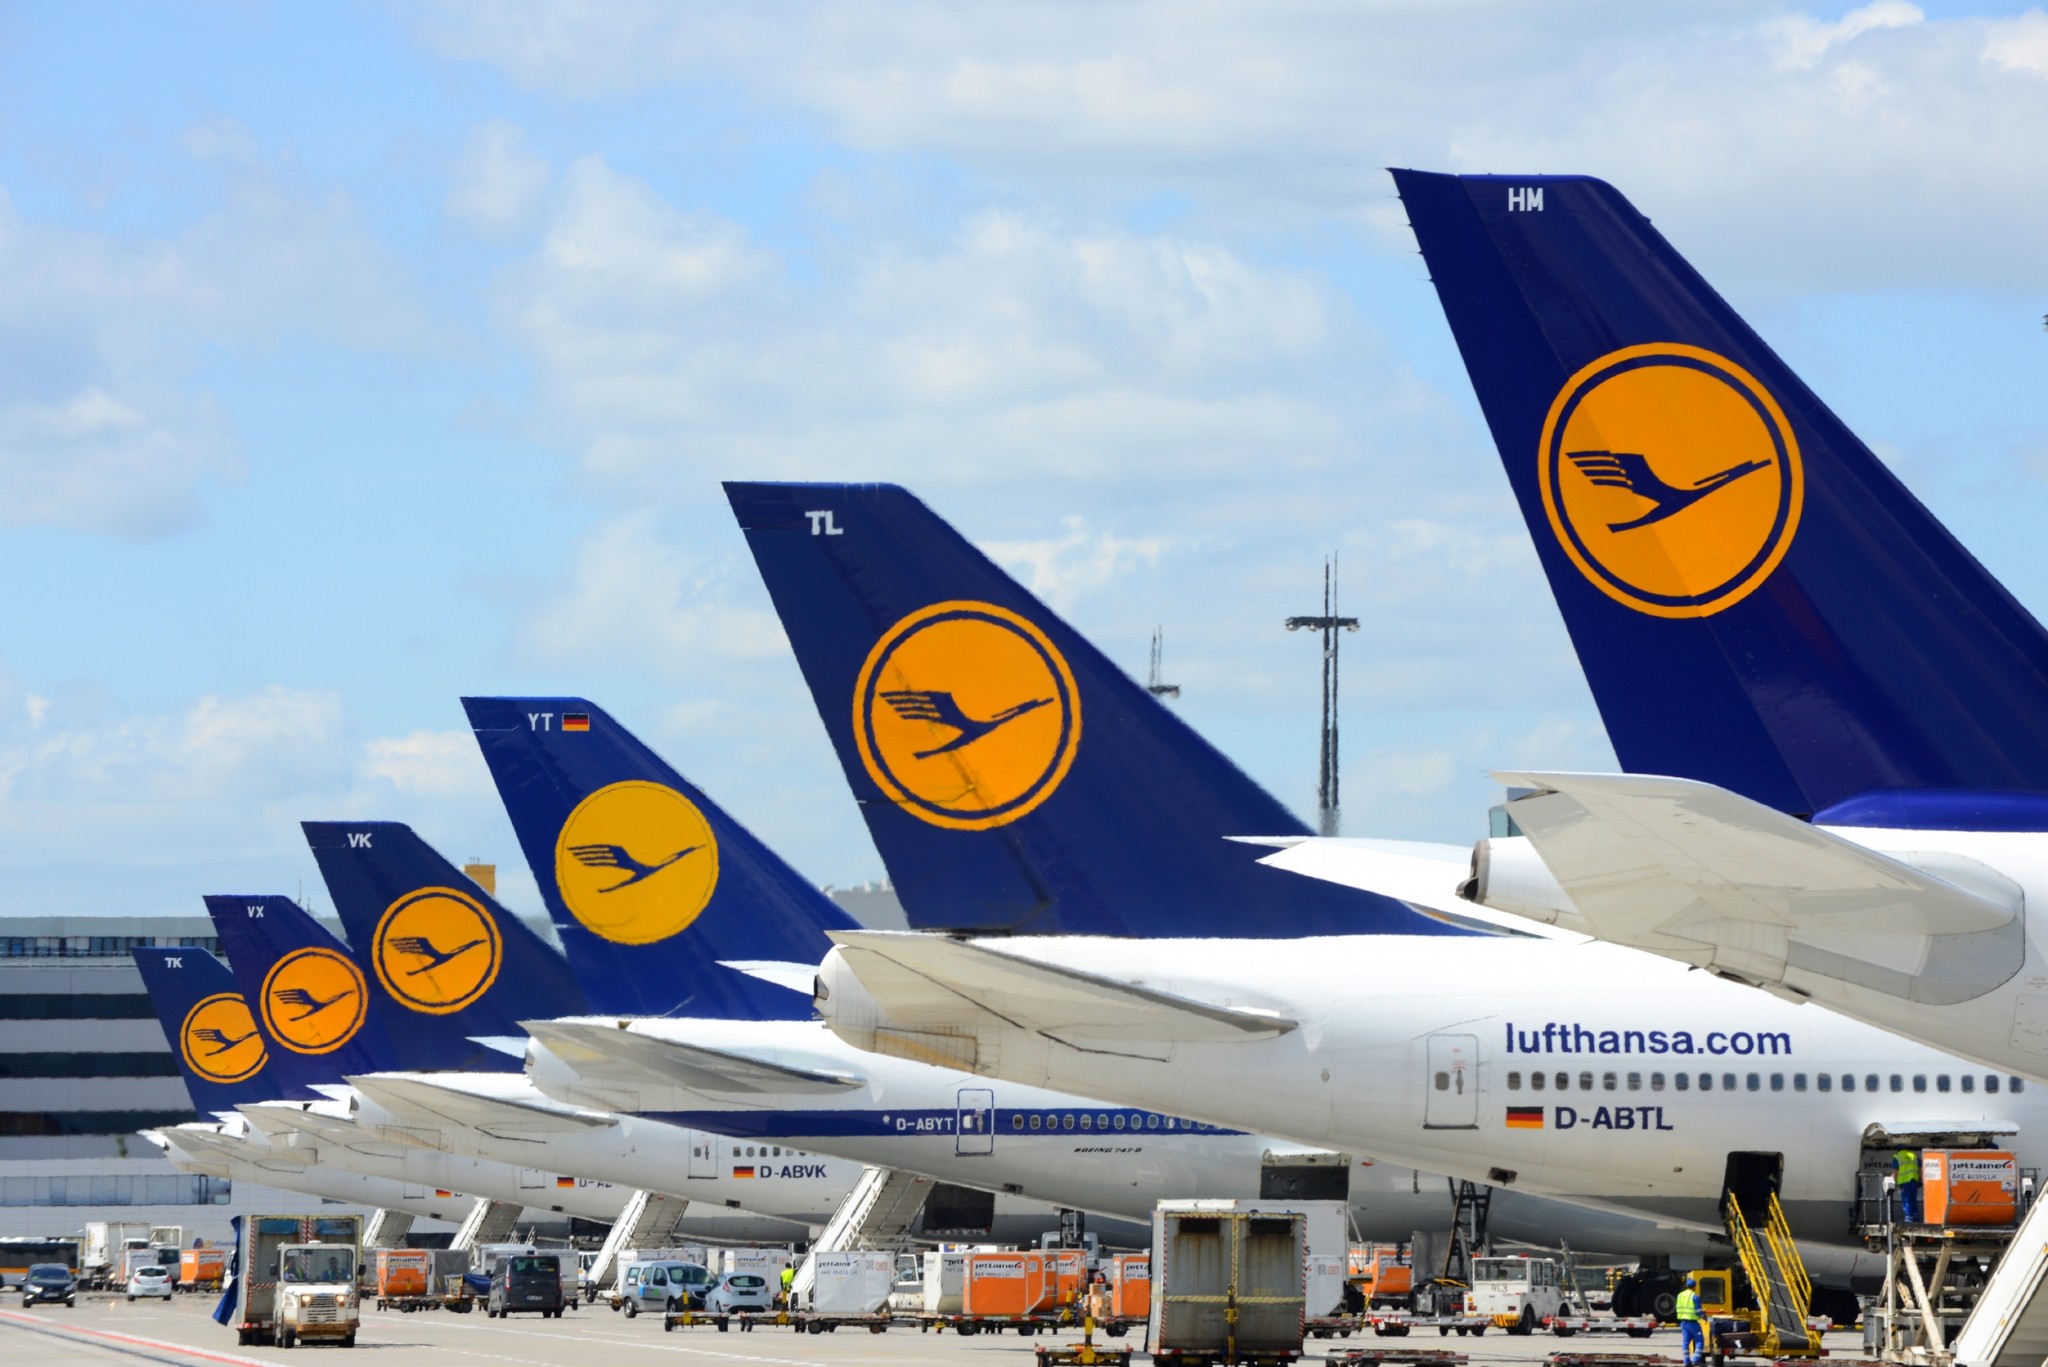 Scope affirms Lufthansa at BBB- and assigns Negative Outlook